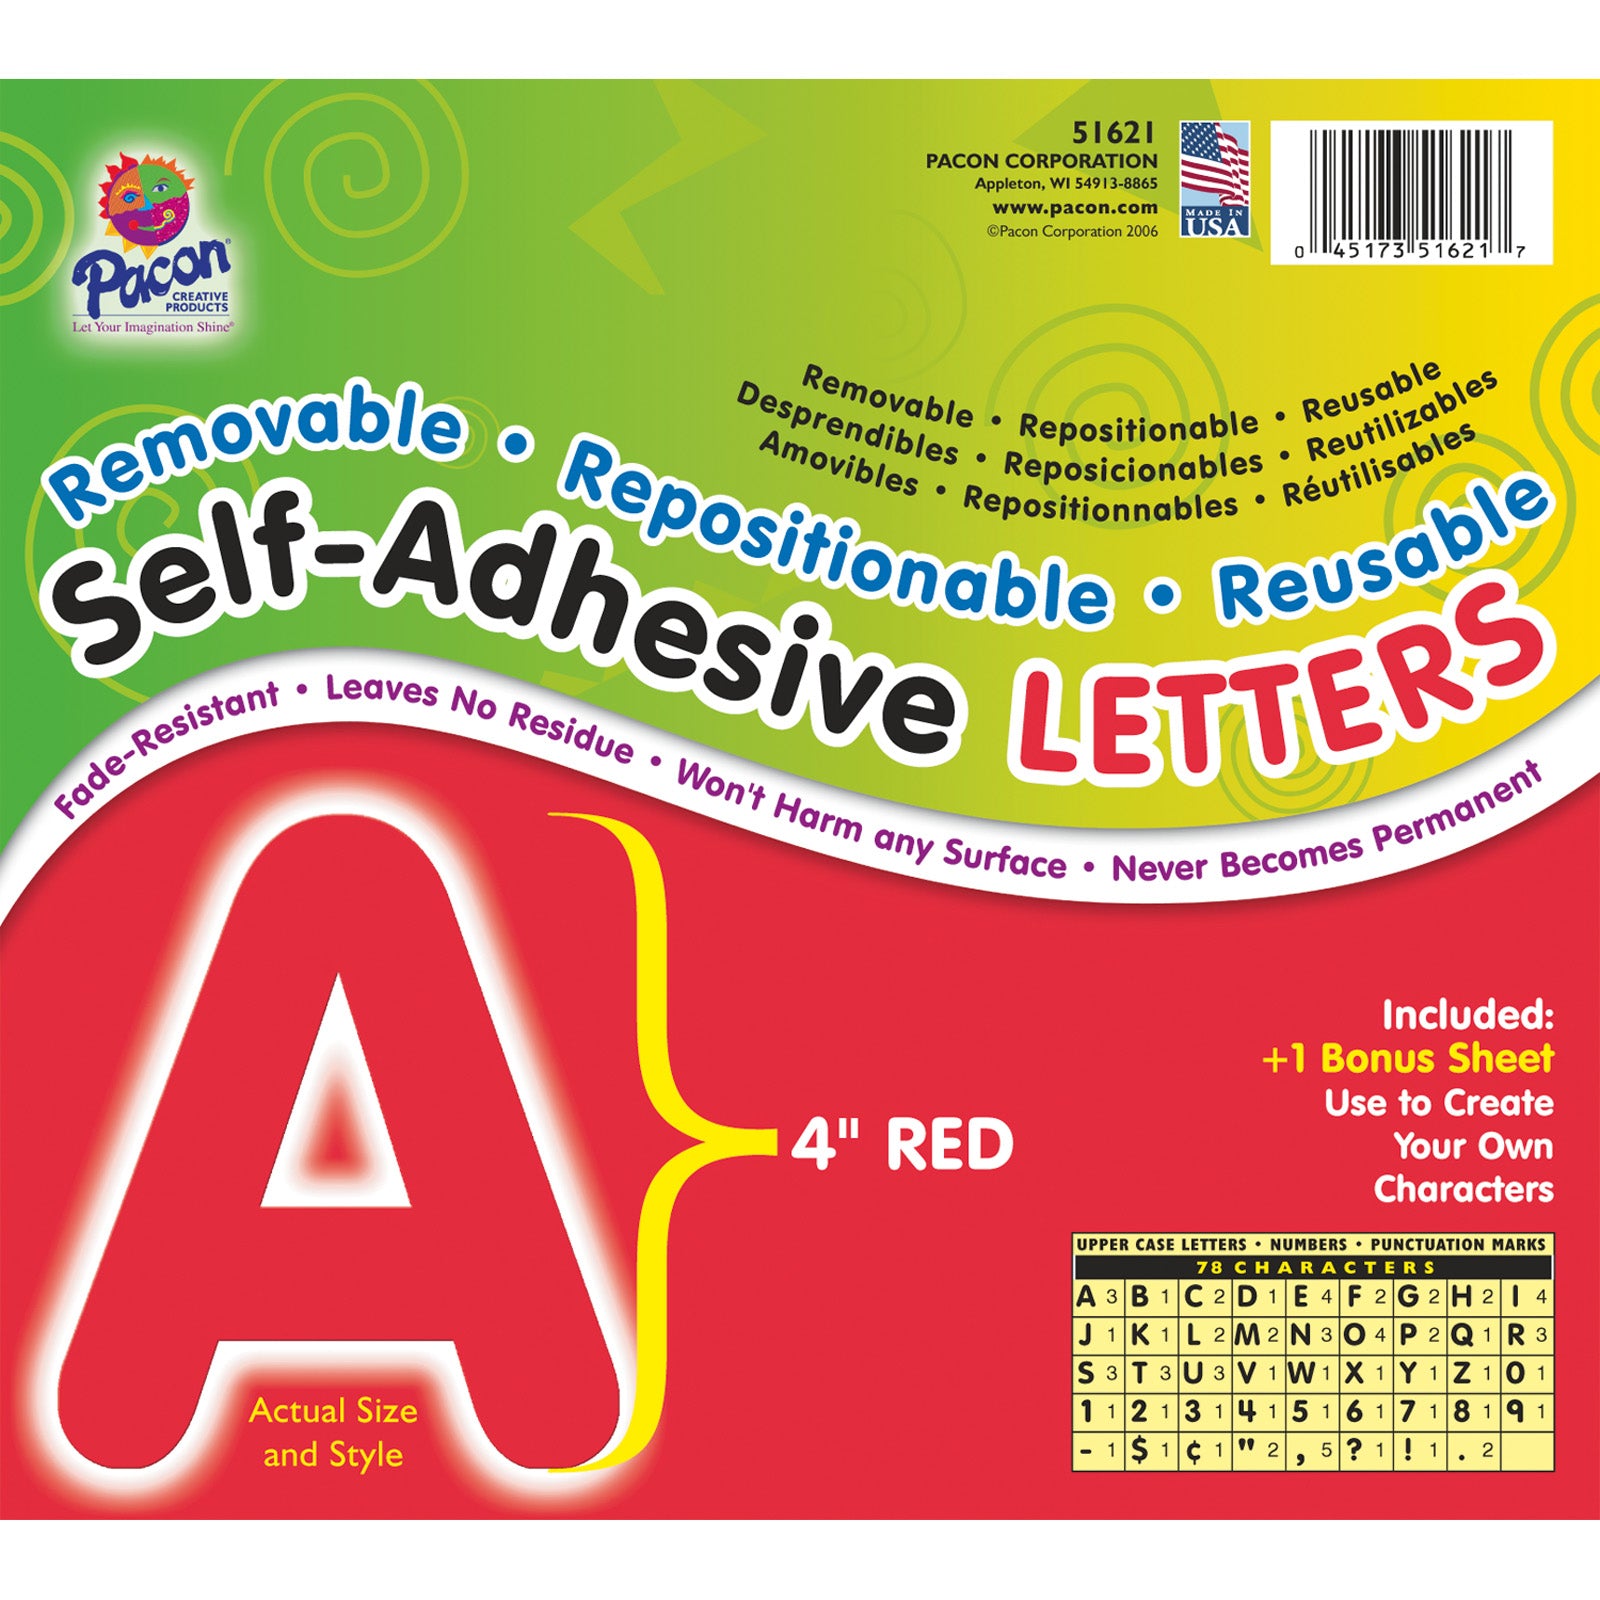 Self-Adhesive Letters, Red, Puffy Font, 4", 78 Characters Per Pack, 2 Packs